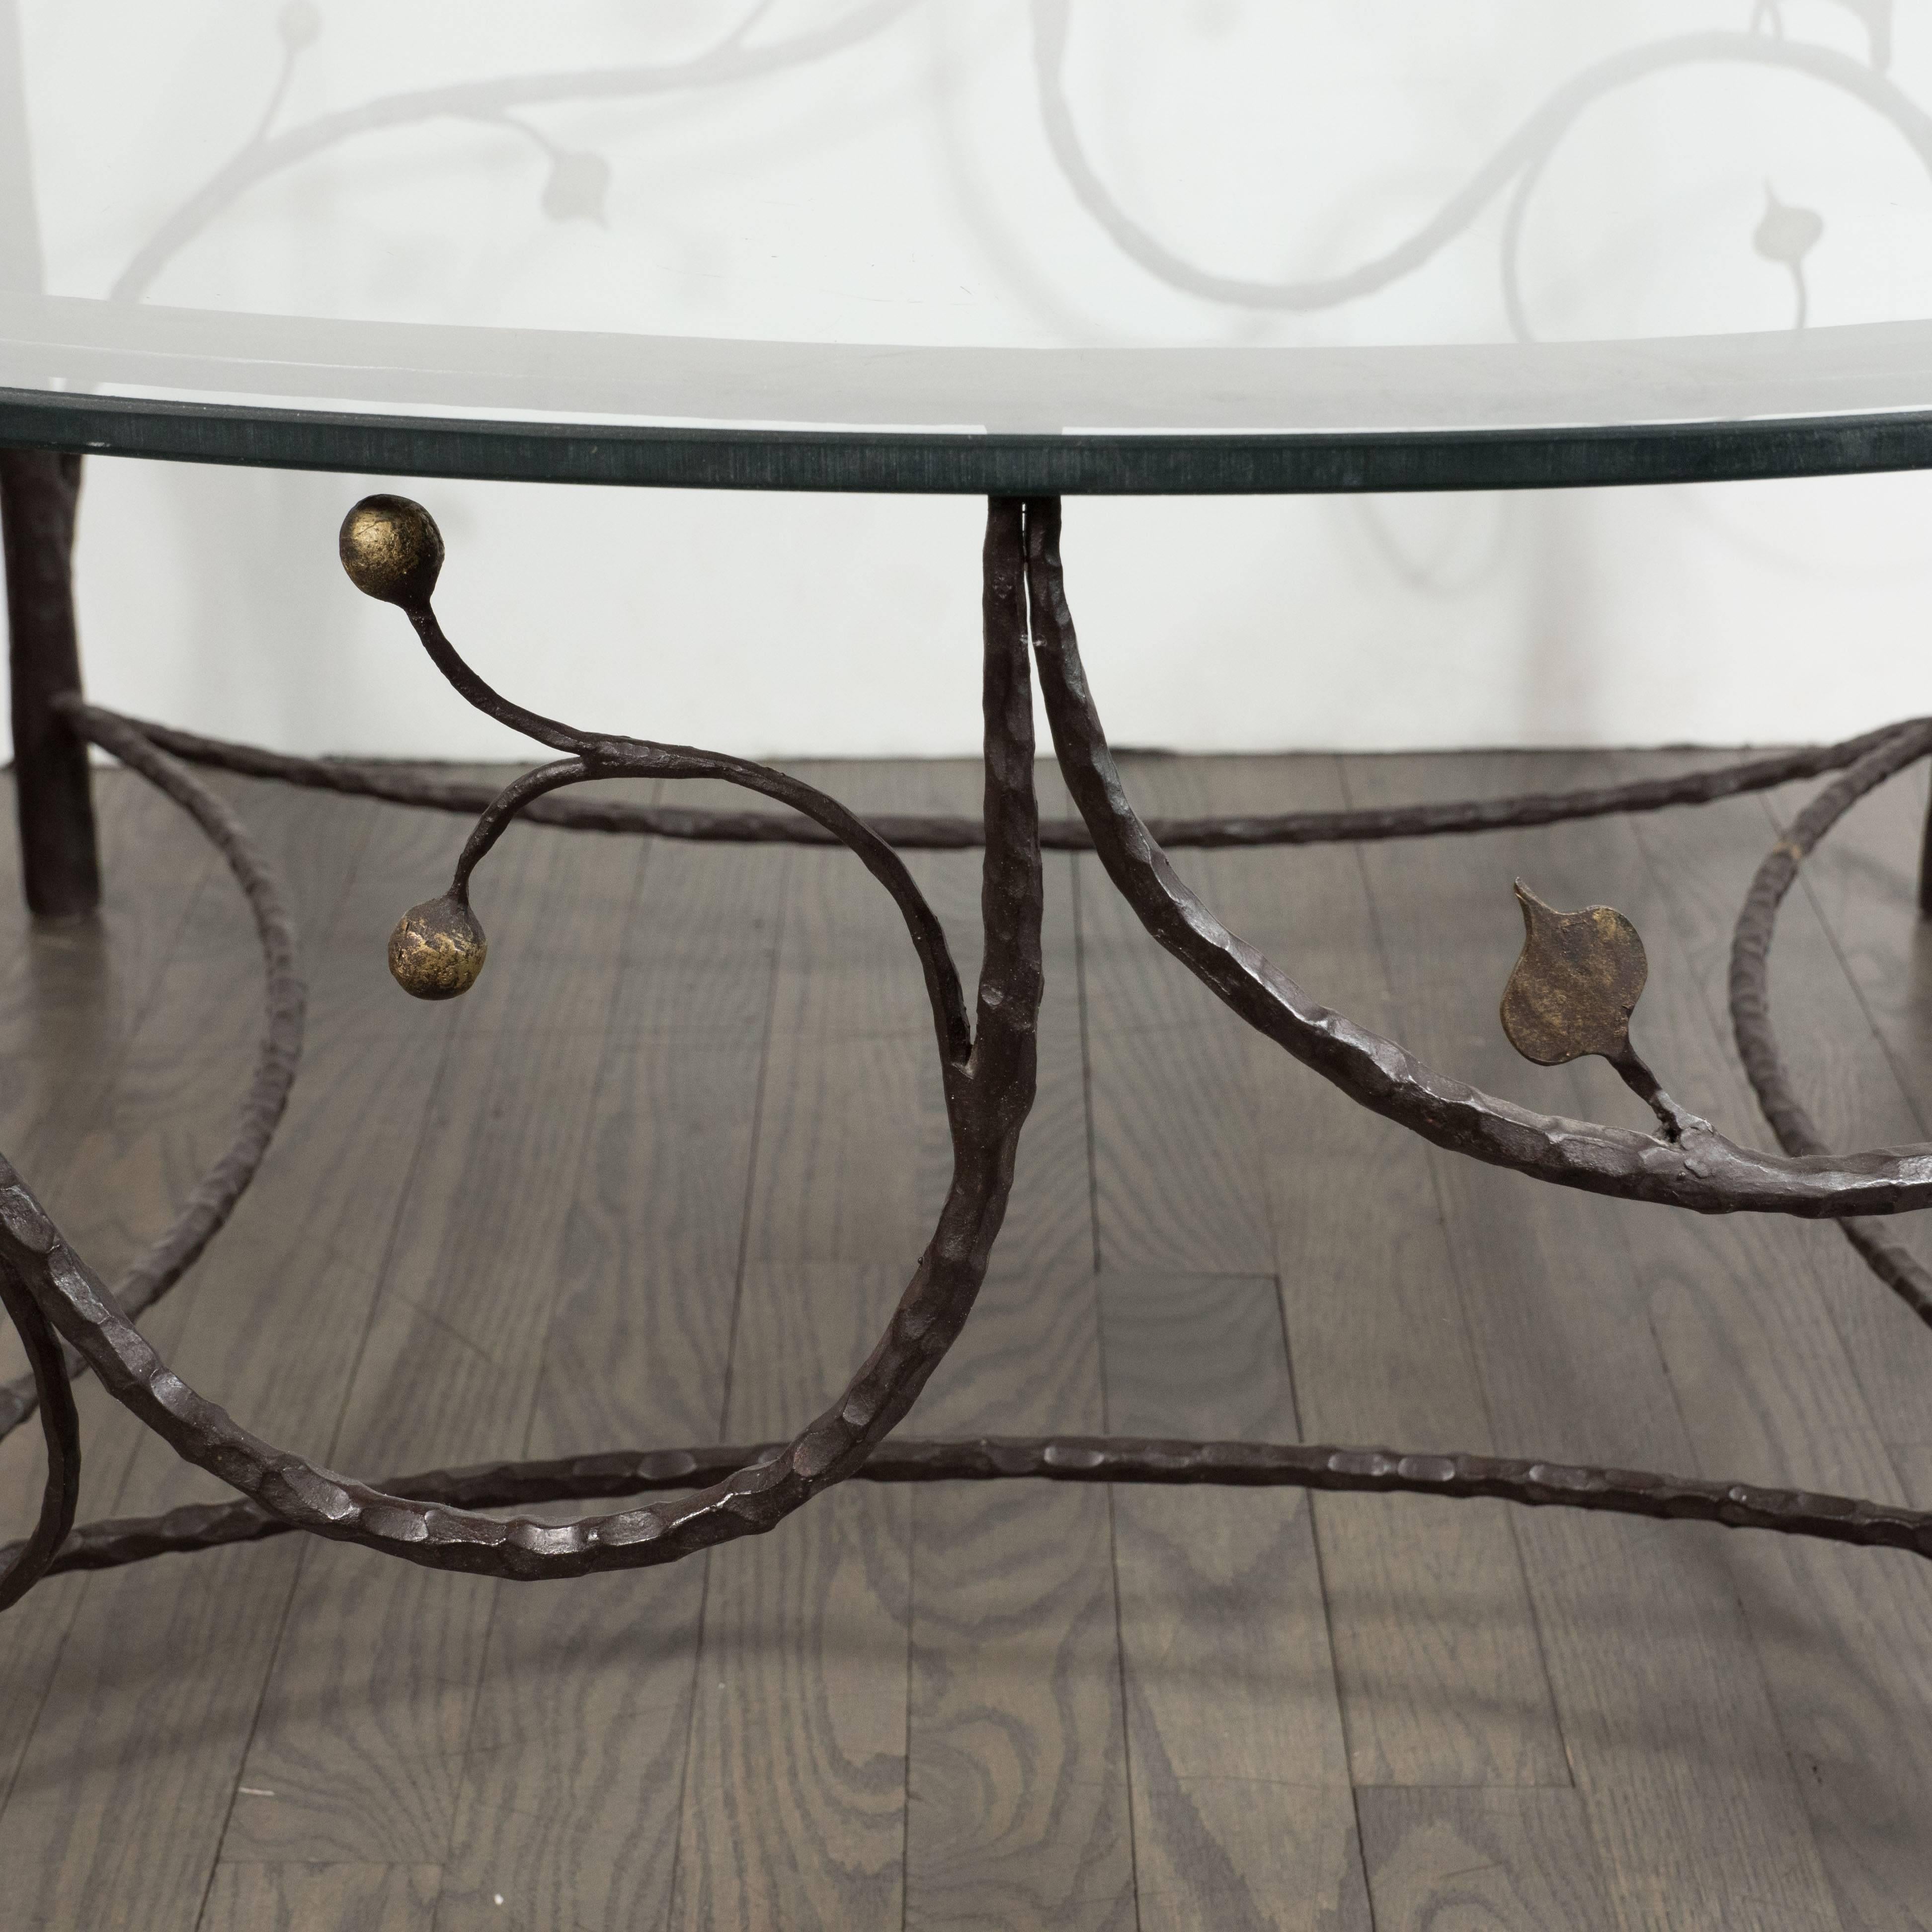 This whimsical yet sophisticated coffee table was realized in the United States, circa 1960. It features four legs that taper to their apex- resembling the form of conifer trees- which support a circular glass top. Scrolling arms culminating in